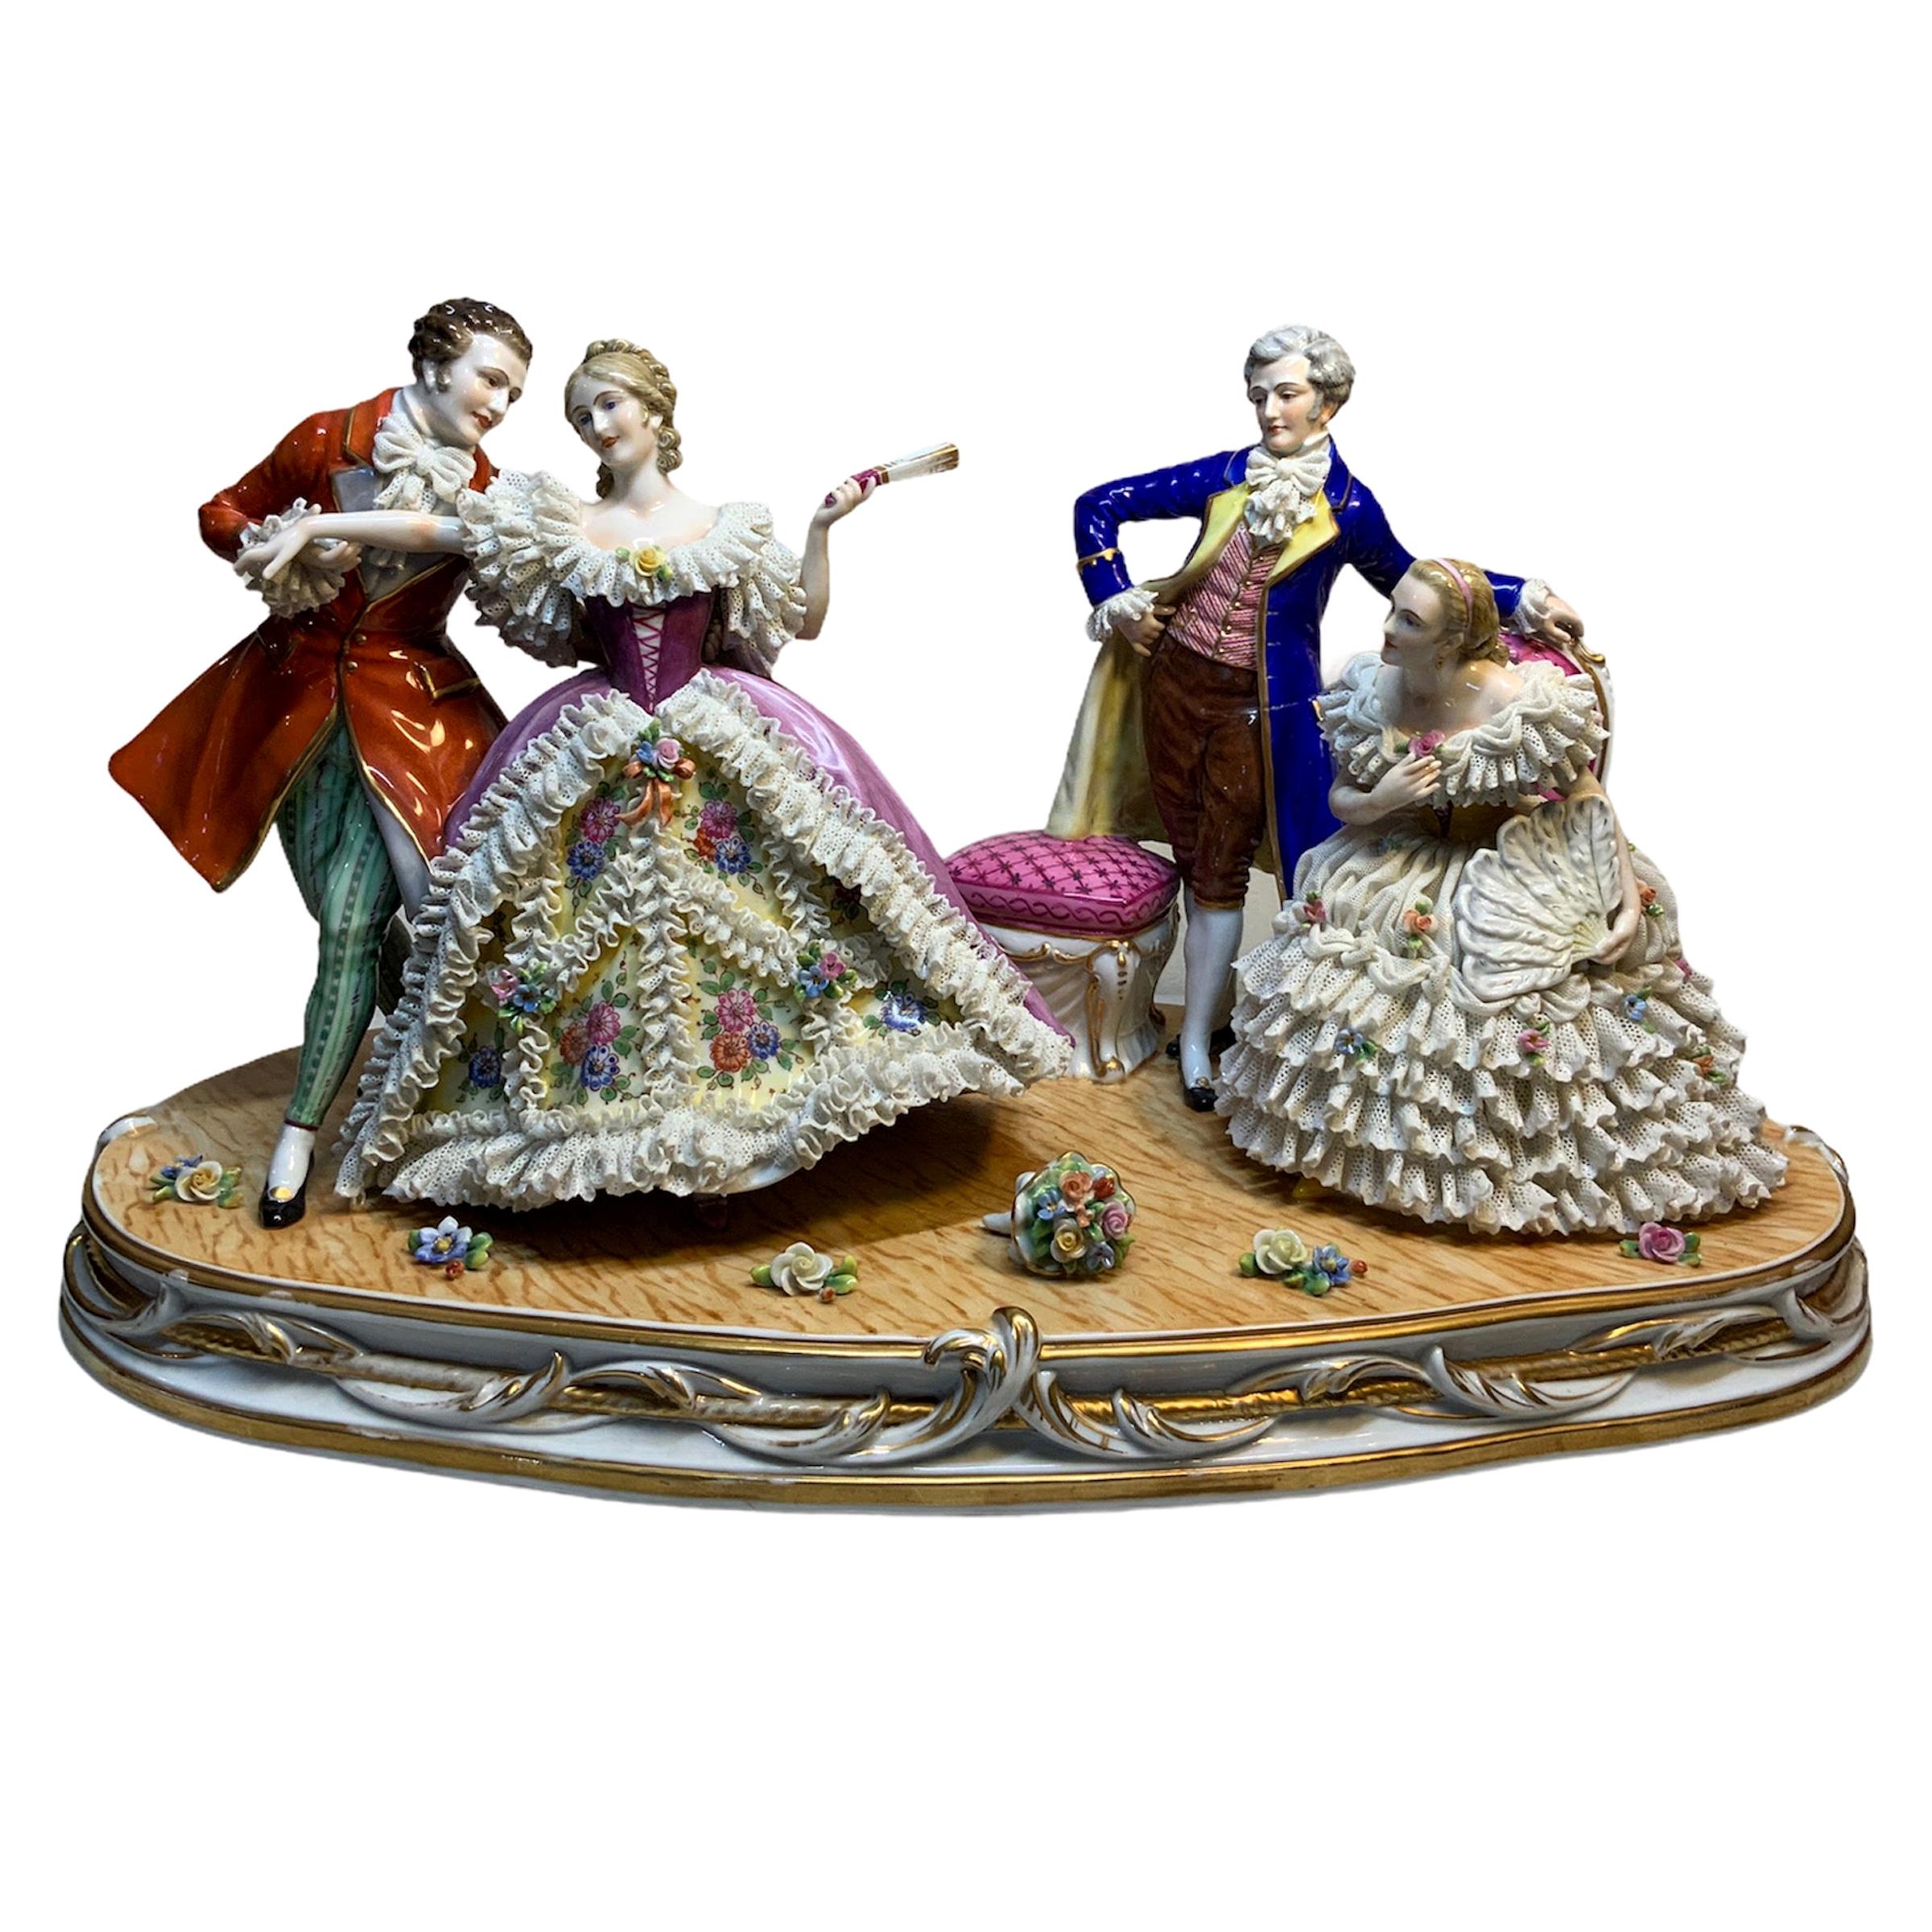 Large Dresden Lace Porcelain Group Figurines